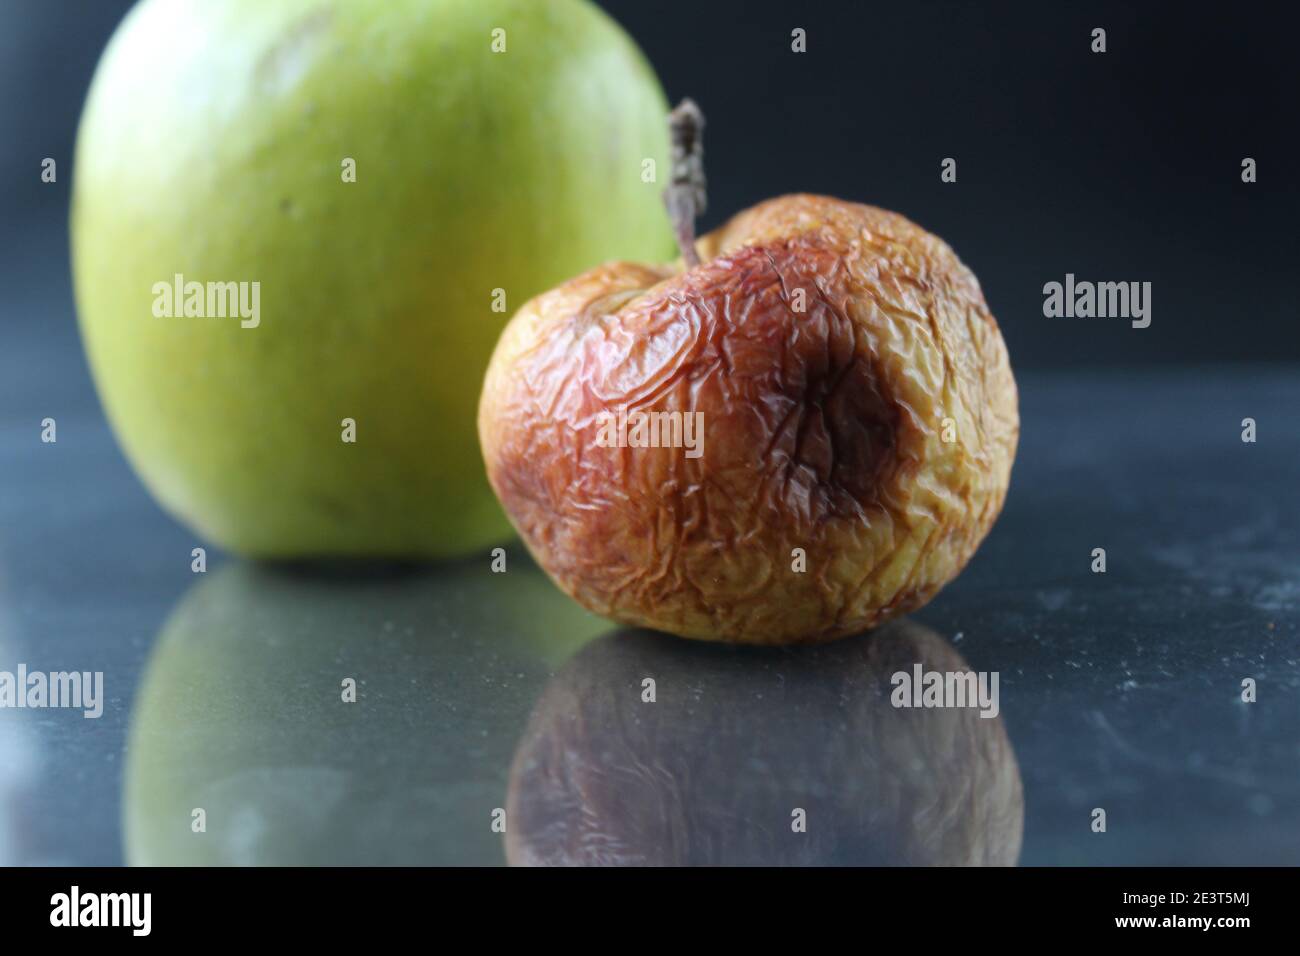 apple ugly spoiled and beautiful good on a black background copyspace. Stock Photo